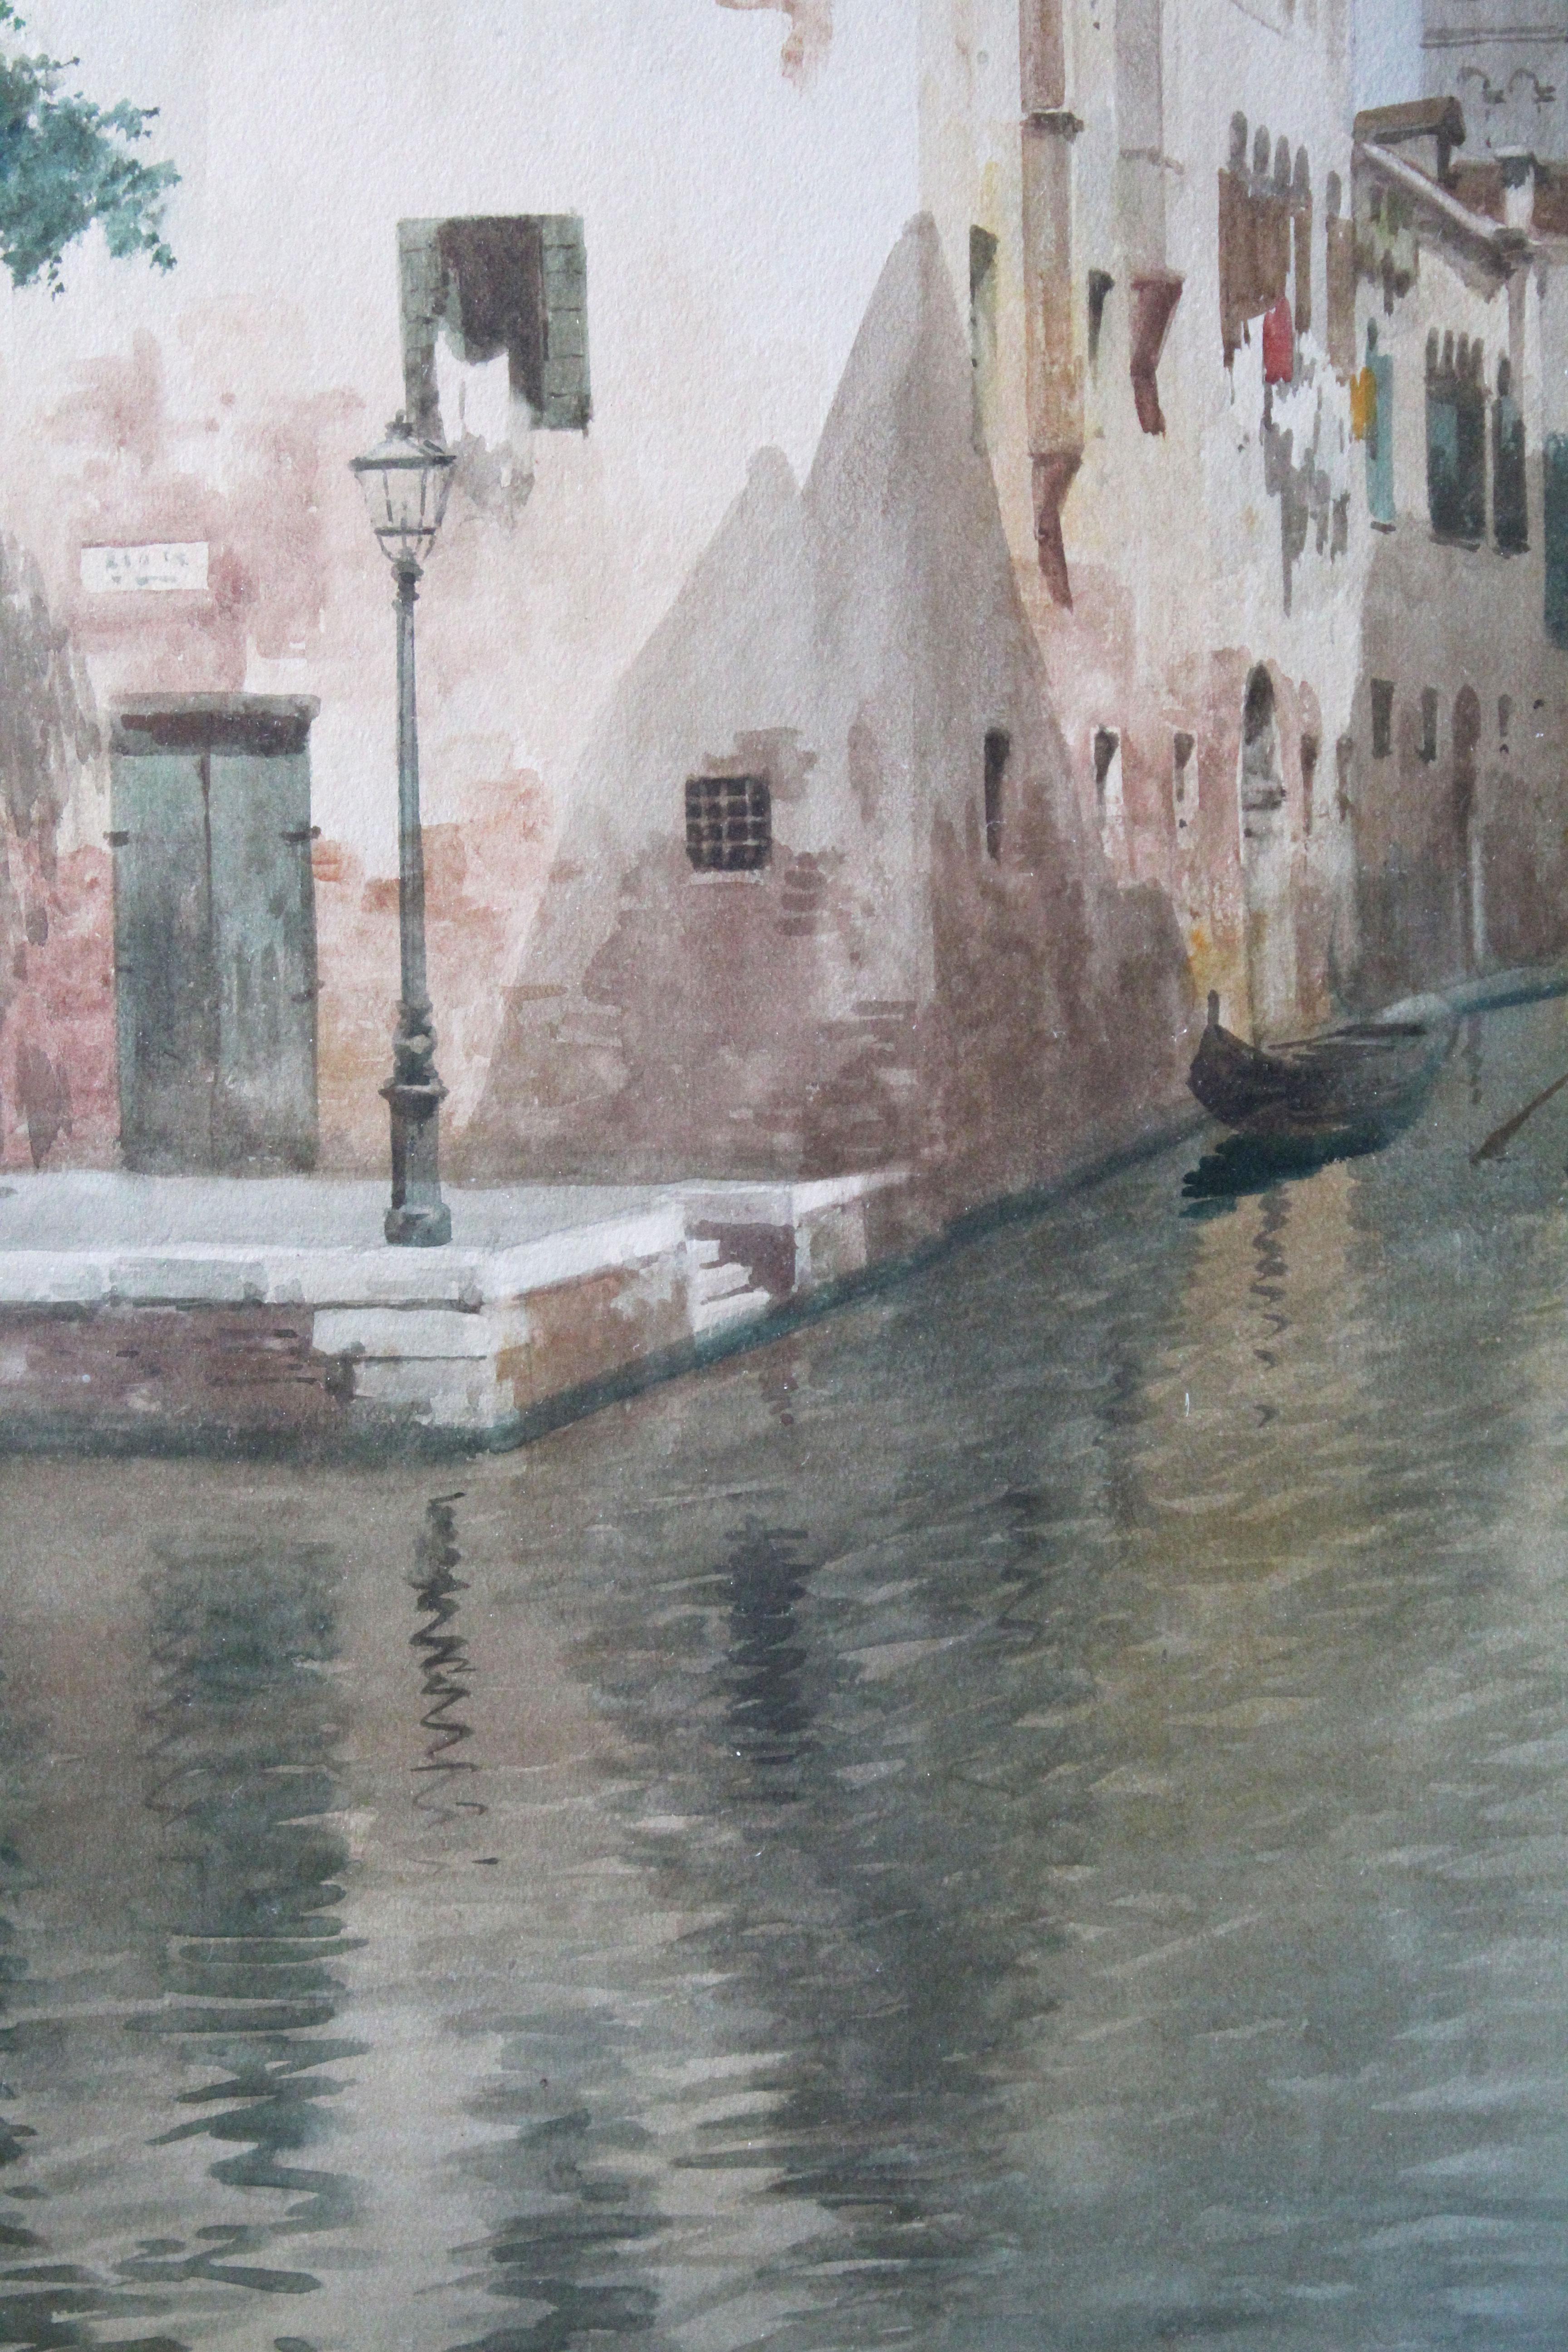 A lyrical watercolor of the ever-beloved city of Venice by an artist known for living and painting there. VERY similar to two Benvenuti watercolors sold as a pair at Bonham's in November of 2018 at the auction (wholesale) price of $2,250  -- and